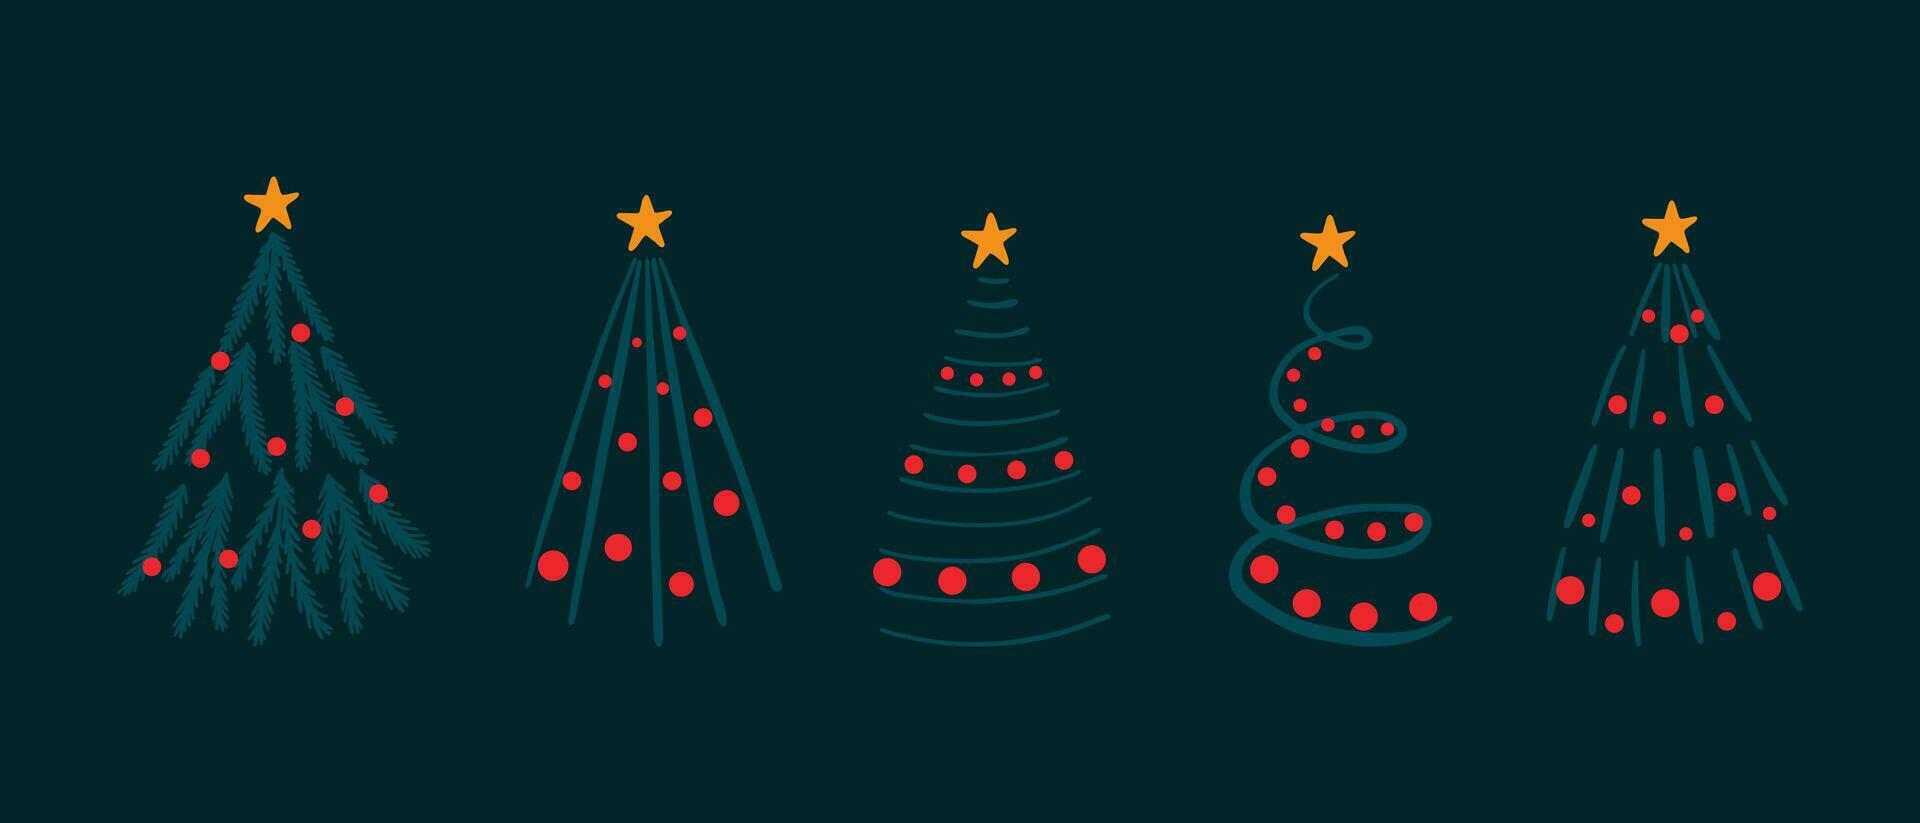 Set of hand drawn Christmas trees. Design for a holiday banner or greeting card for Christmas and New Year. Illustration in doodle style. Vector illustration